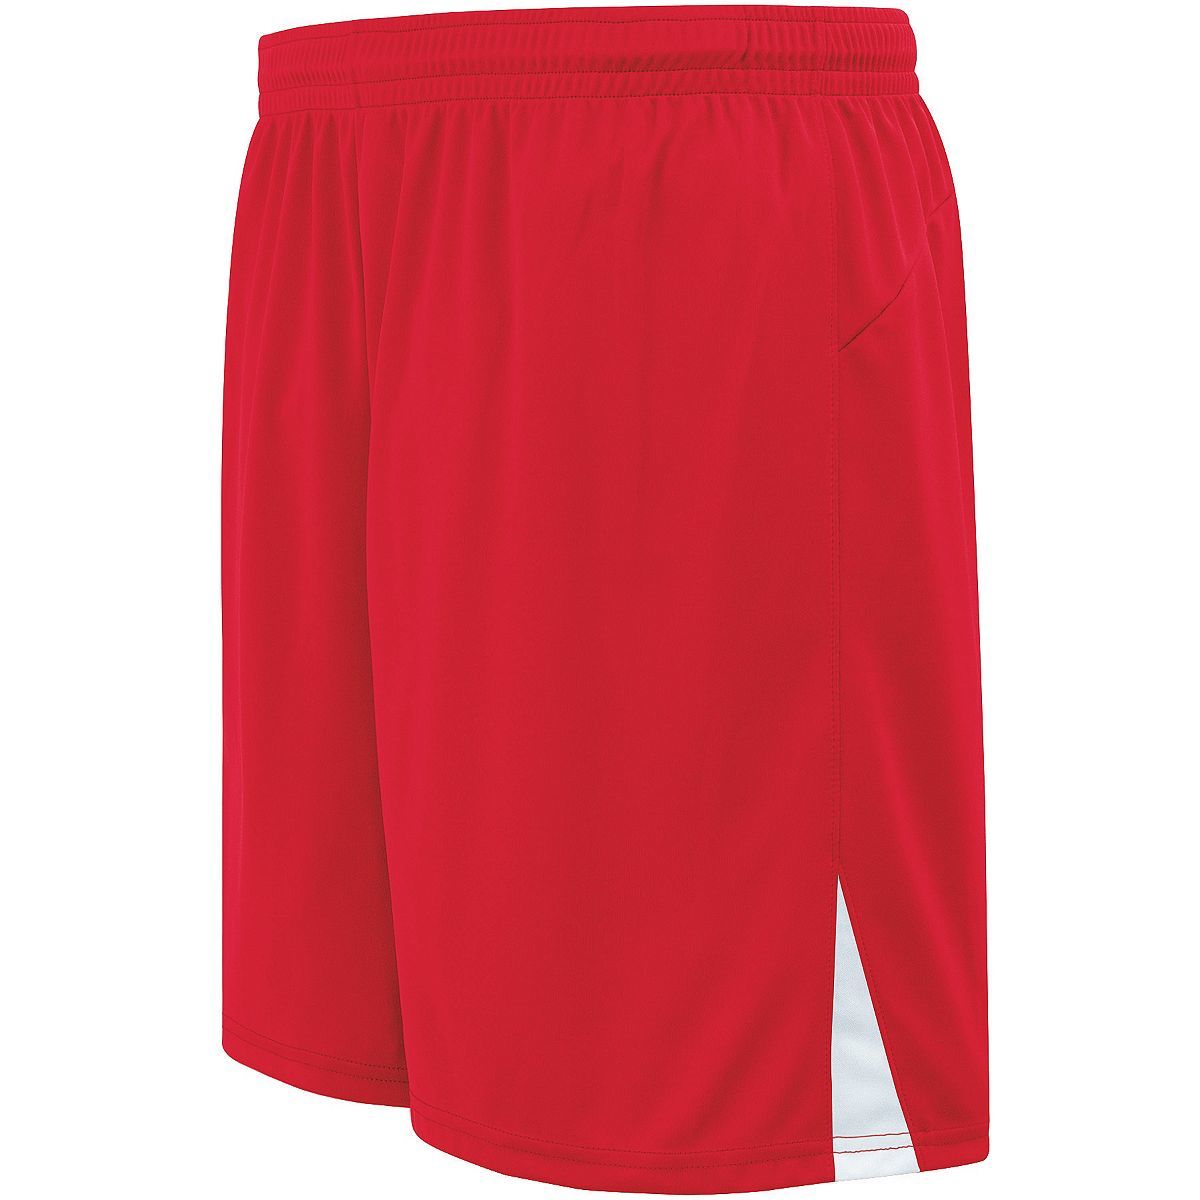 High 5 Youth Hawk Shorts in Scarlet/White  -Part of the Youth, Youth-Shorts, High5-Products, Soccer, All-Sports-1 product lines at KanaleyCreations.com